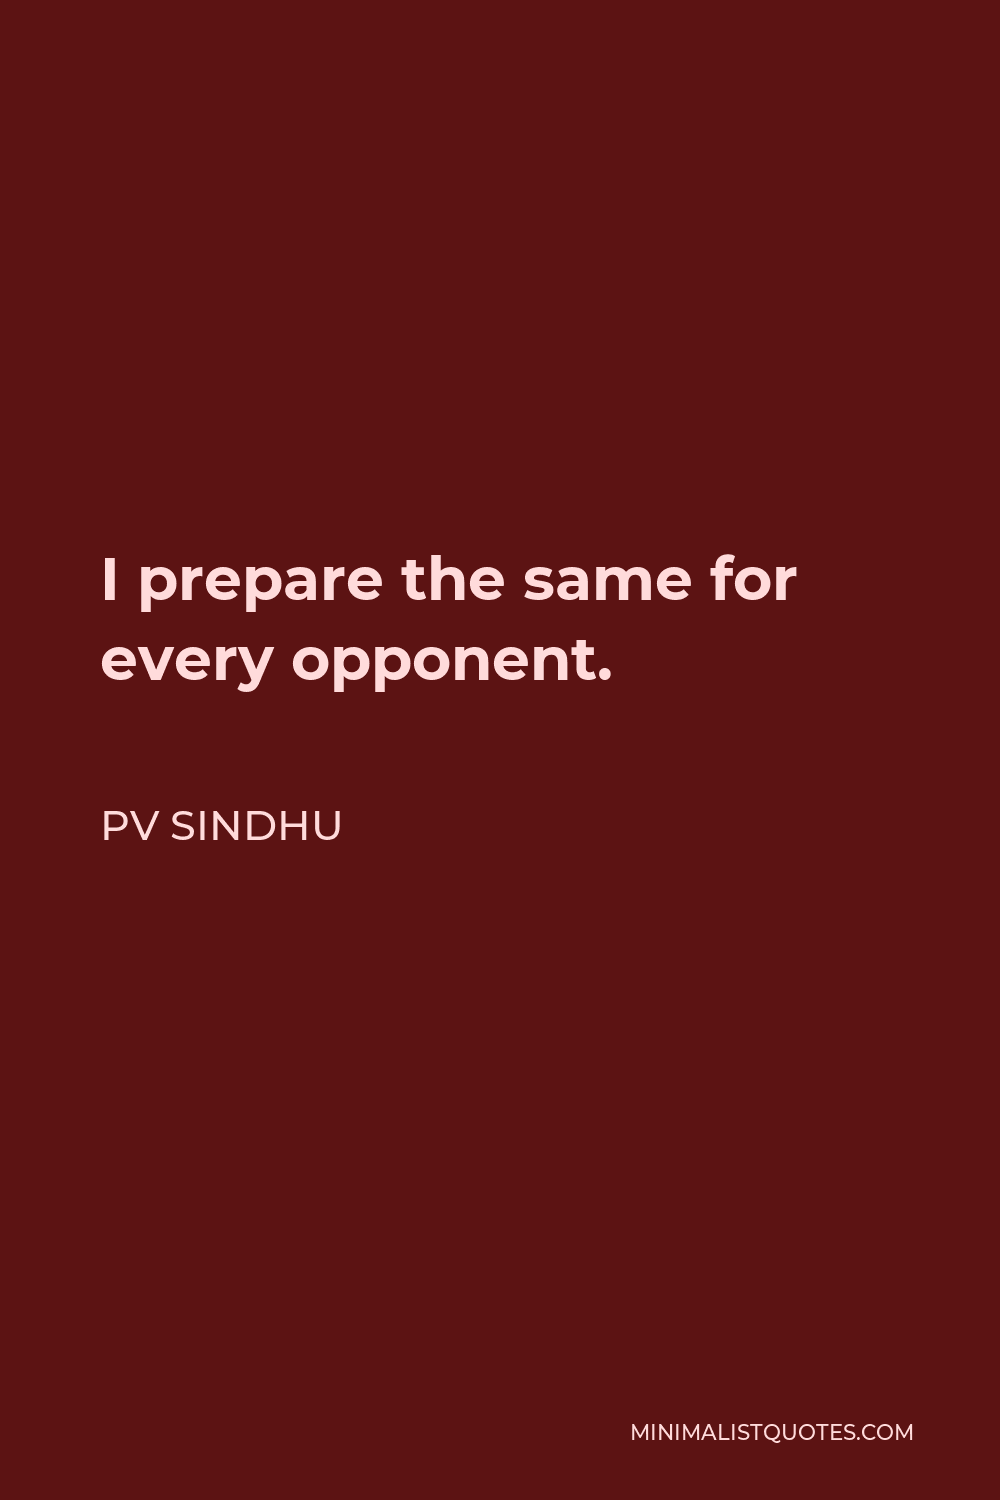 PV Sindhu Quote: I prepare the same for every opponent.